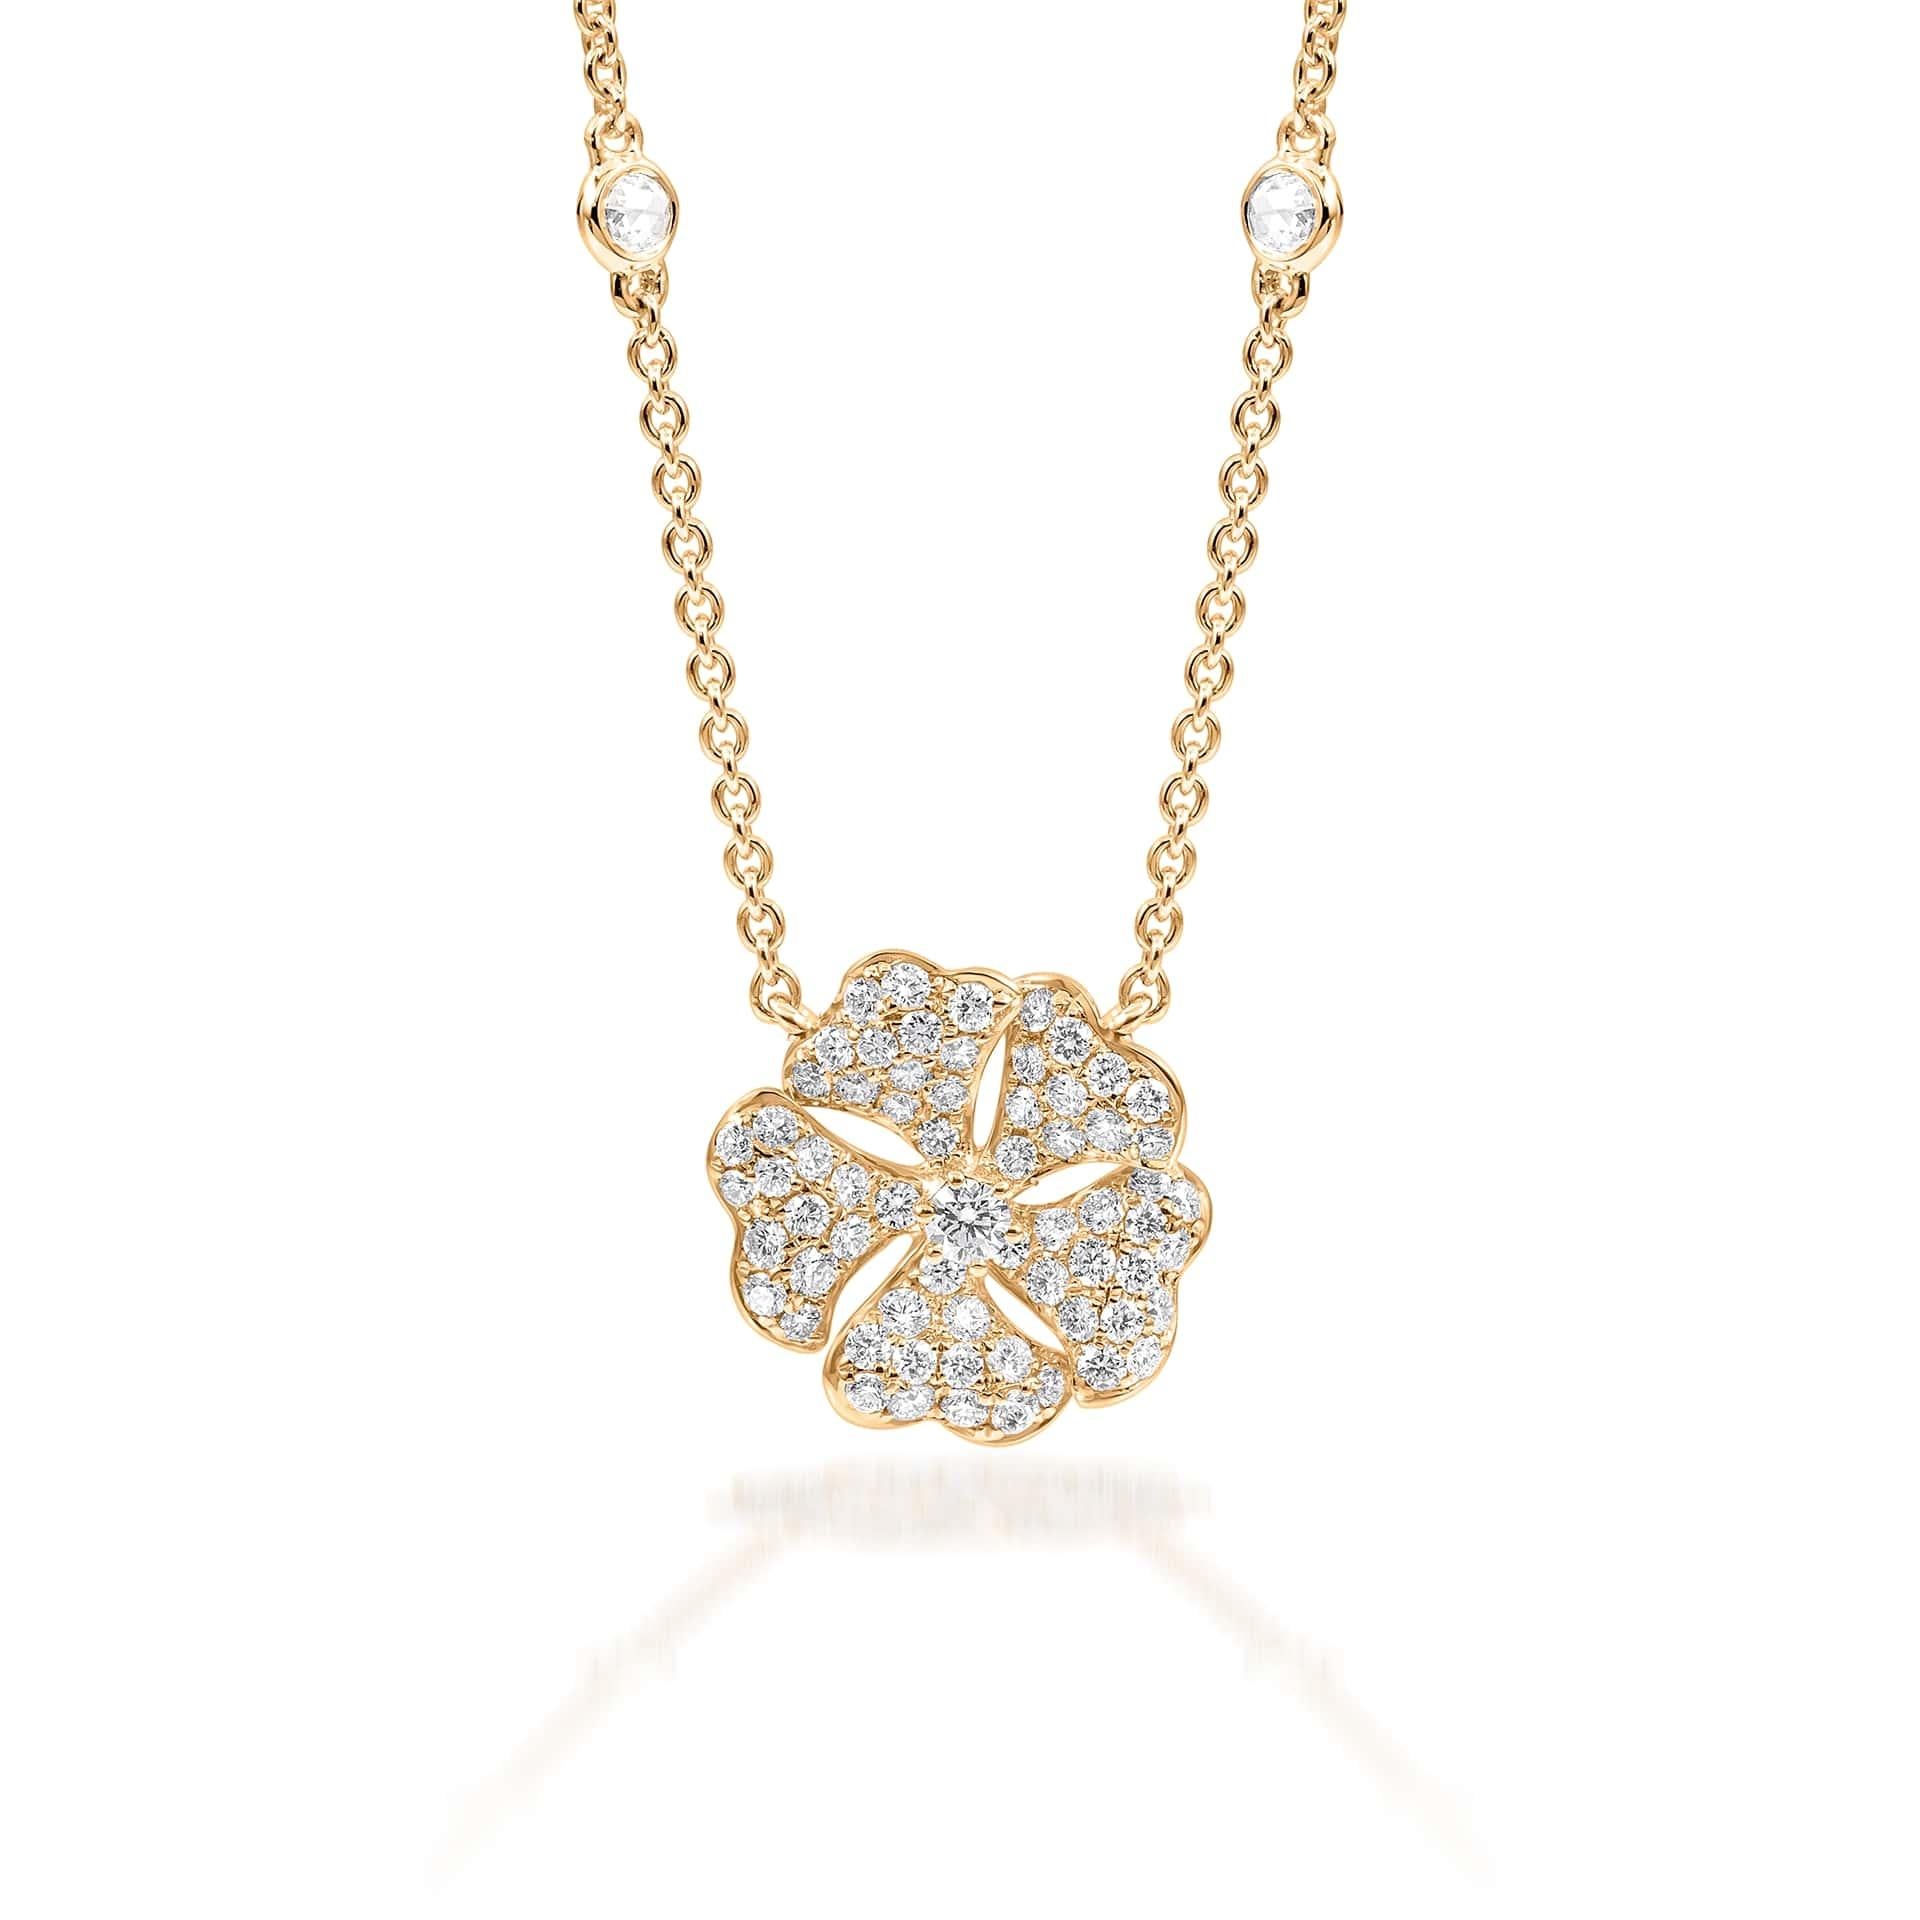 Bloom Diamond Solo Flower Necklace in 18K Yellow Gold

Inspired by the exquisite petals of the alpine cinquefoil flower, the Bloom collection combines the richness of diamonds and precious metals with the light versatility of this delicate,